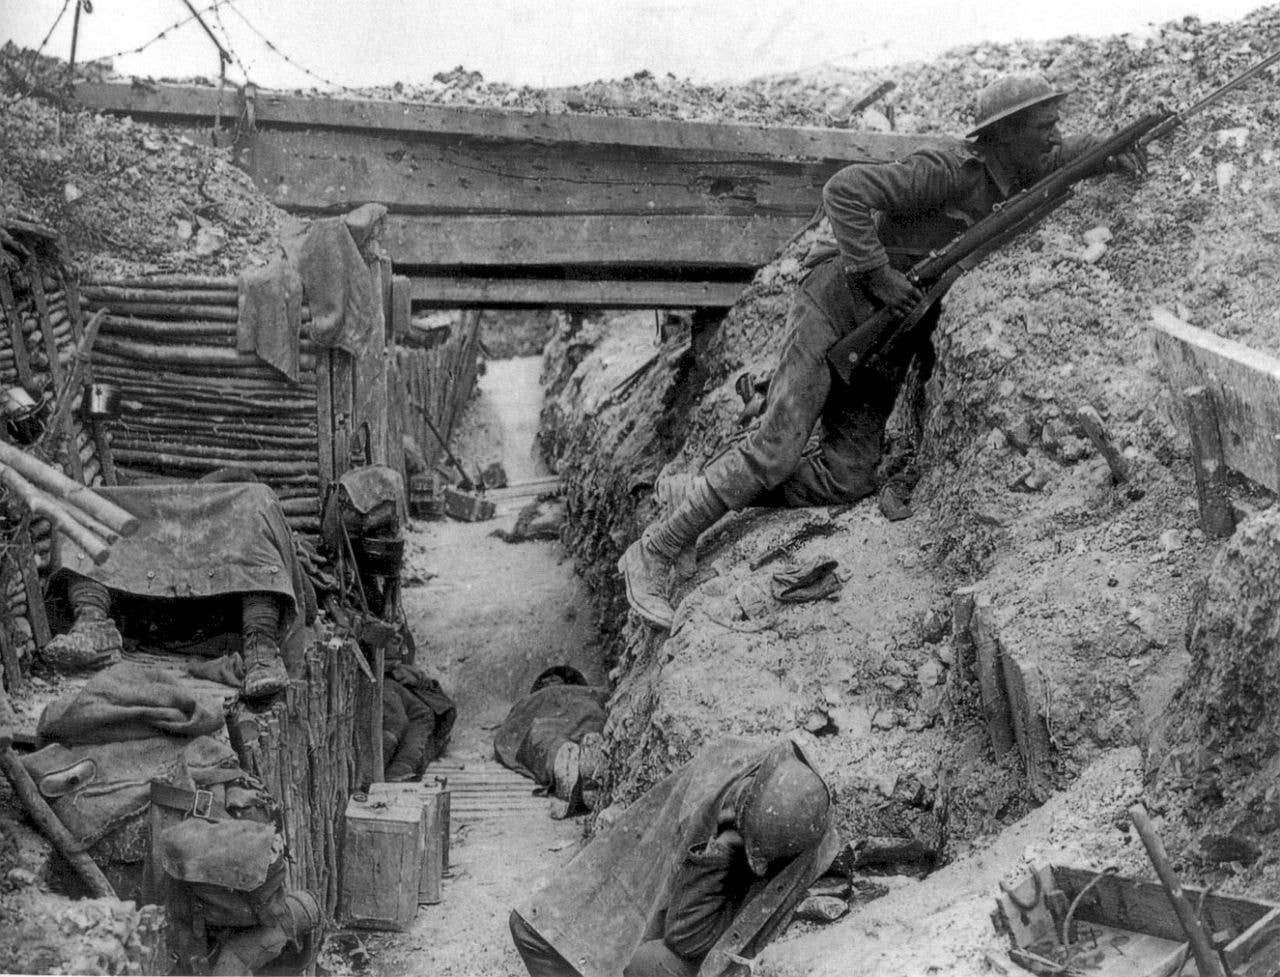 Trenches of the 11th Cheshire Regiment at Ovillers-la-Boisselle, on the Somme, July 1916. (Wikimedia Commons)